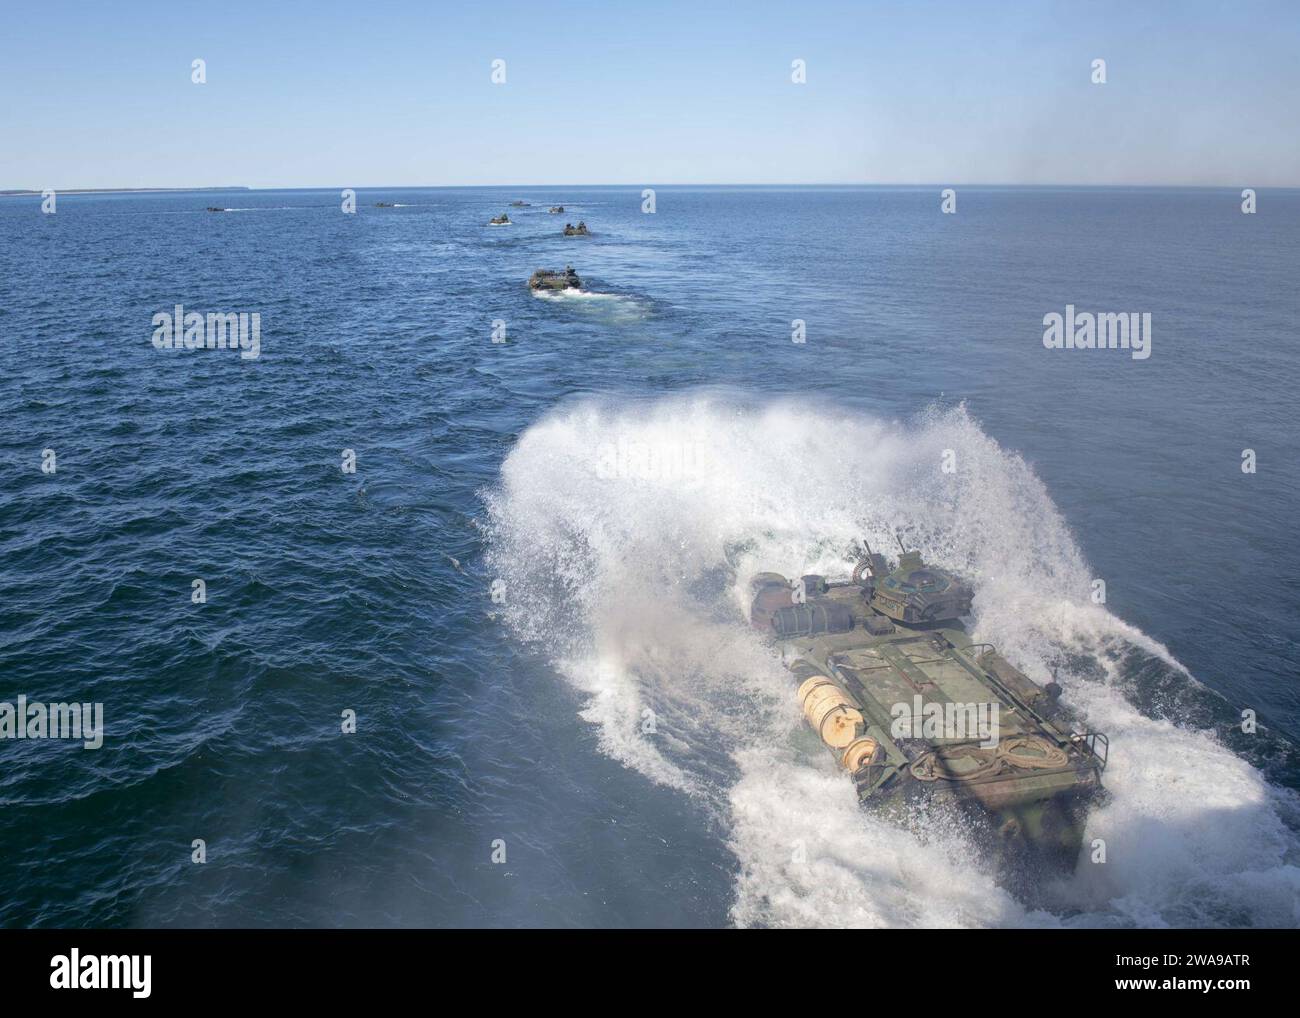 US military forces. 180607PC620-0121 BALTIC SEA (June 7, 2018) An AAV-P7/A1 assault amphibious vehicle attached to the 26th Marine Expeditionary Unit departs the well deck of the Harpers Ferry-class dock landing ship USS Oak Hill (LSD 51) during an amphibious assault exercise during exercise Baltic Operations (BALTOPS) 2018, June 7. BALTOPS is the premier annual maritime-focused exercise in the Baltic region and one of the largest exercises in Northern Europe enhancing flexibility and interoperability among allied and partner nations. (U.S. Navy photo by Mass Communication Specialist 3rd Class Stock Photo